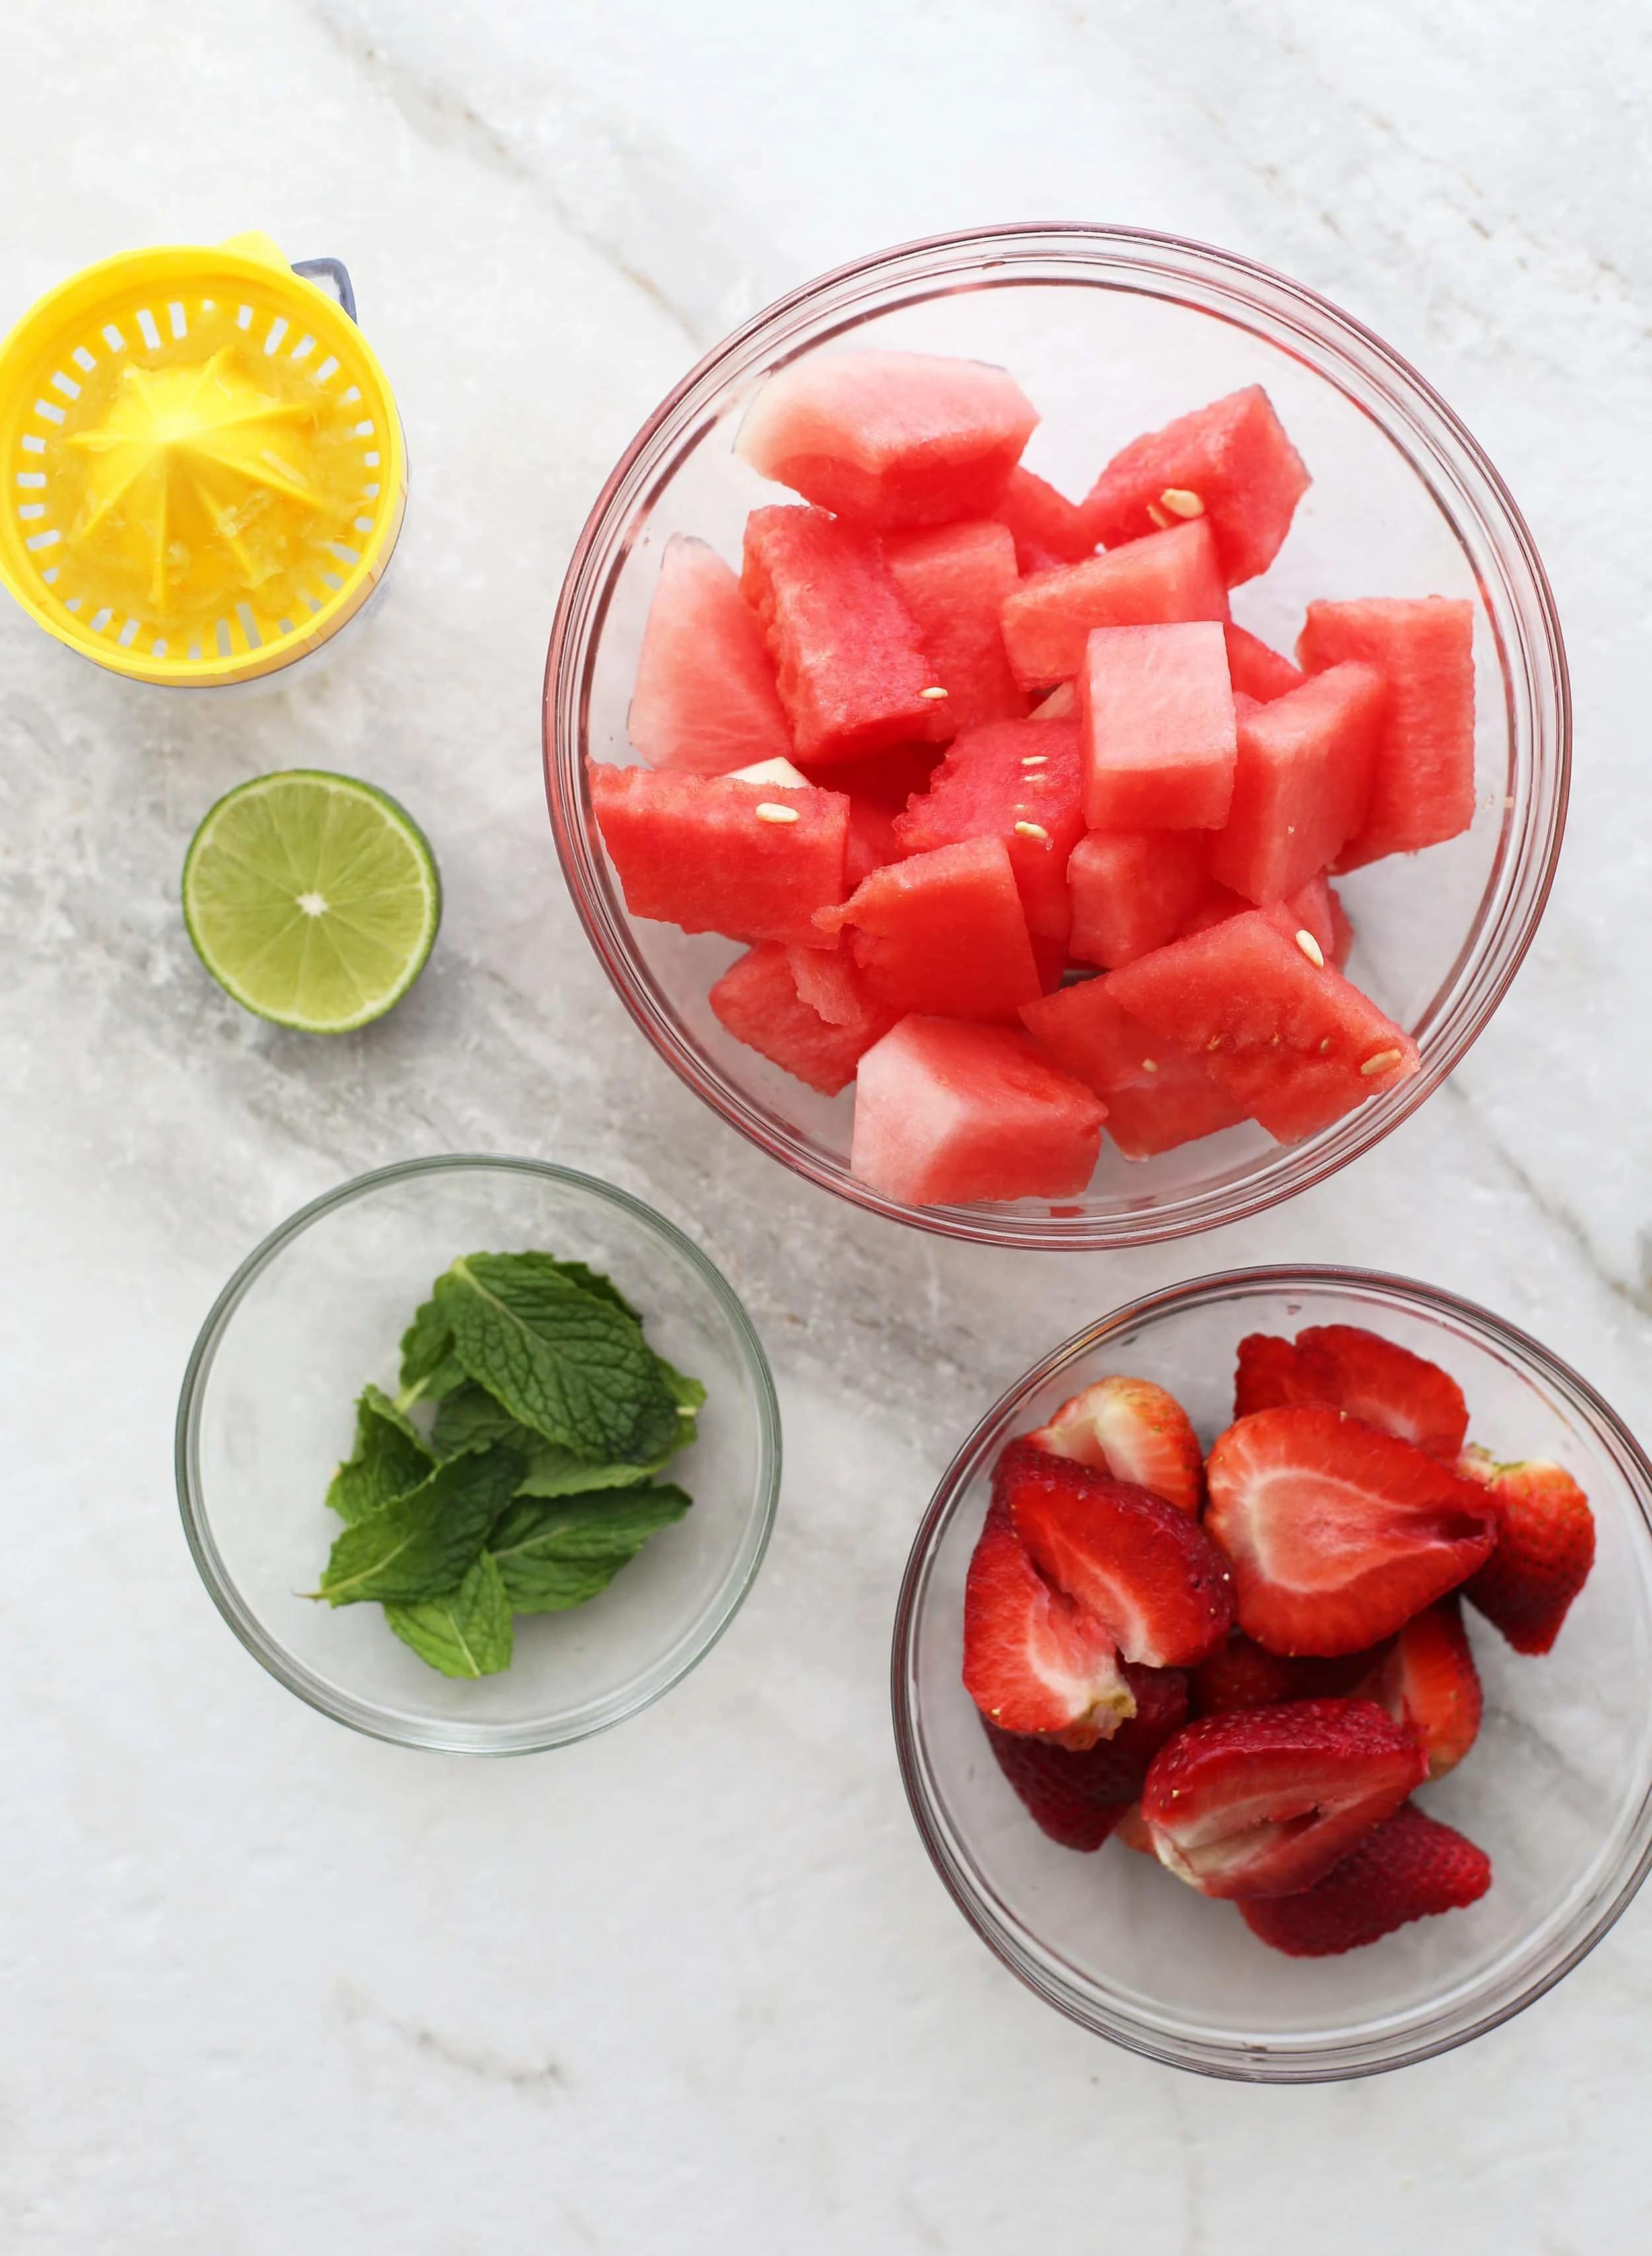 Bowls of strawberries, watermelon, fresh mint, and half a lime.